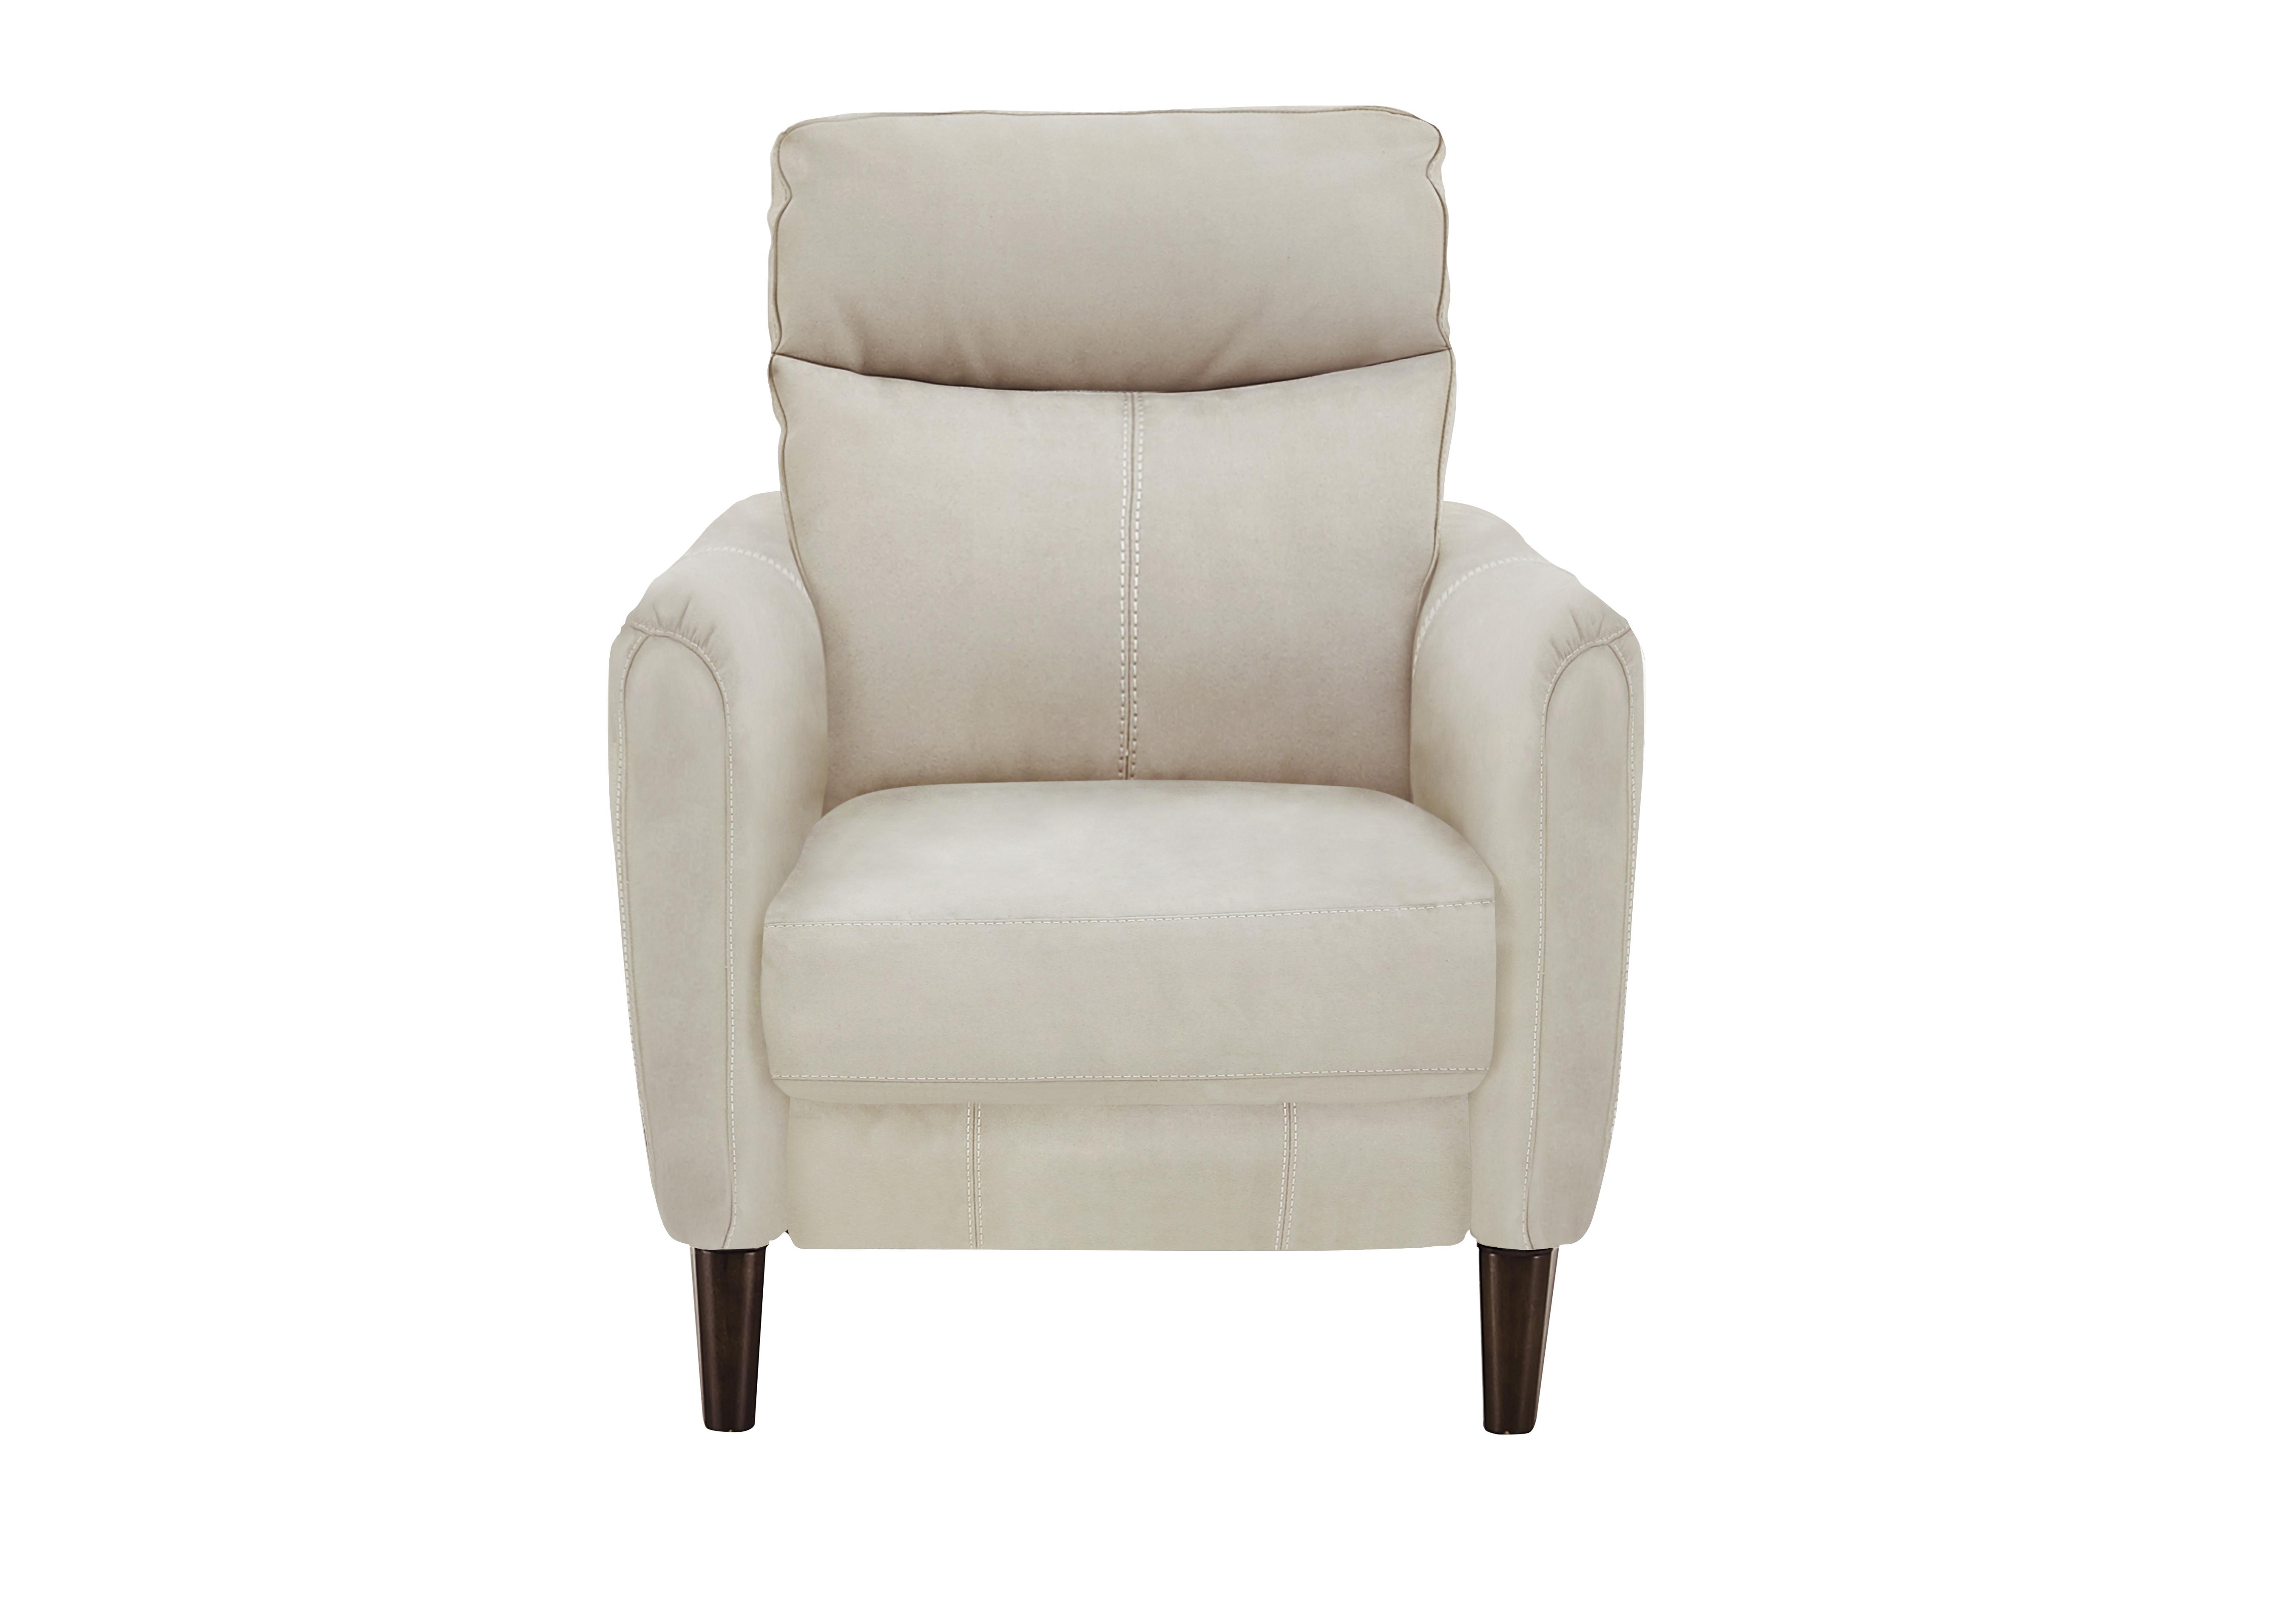 Compact Collection Petit Fabric Armchair in Bfa-Blj-R20 Bisque on Furniture Village